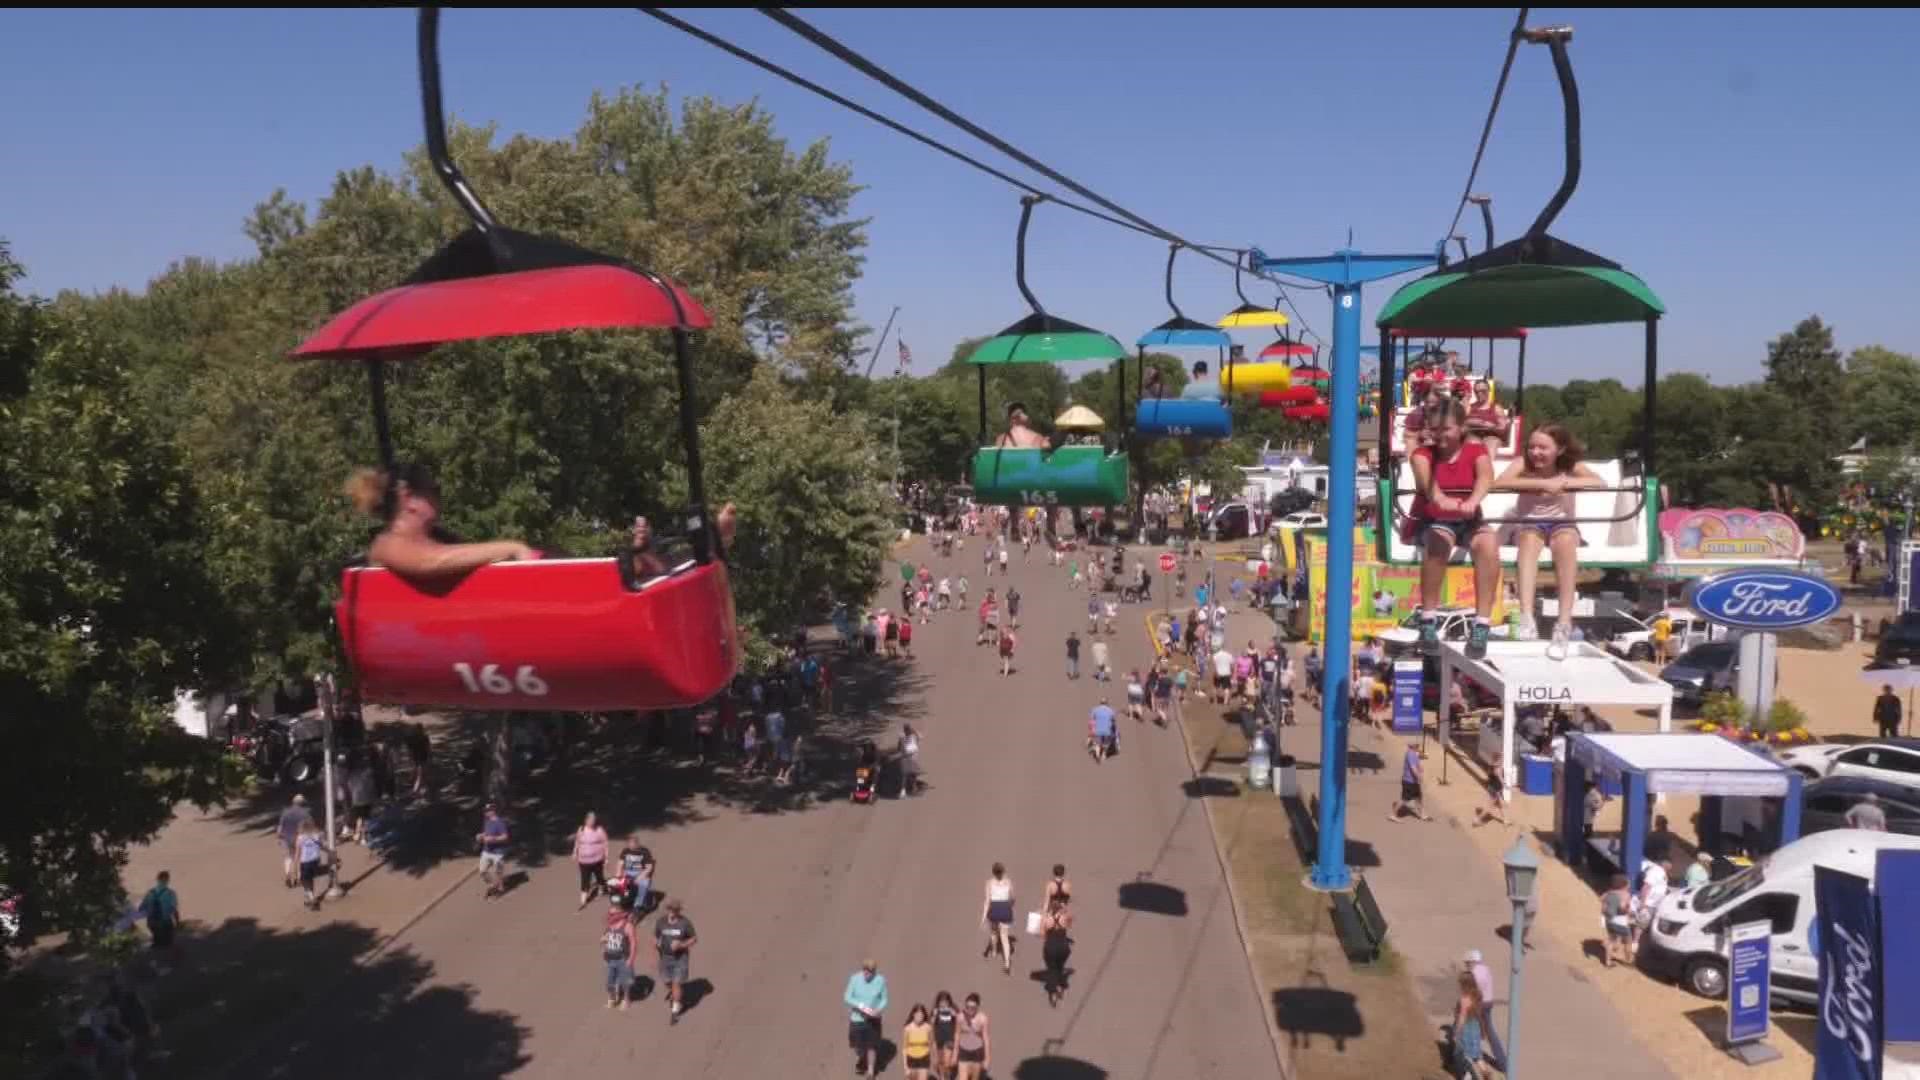 Get your Pronto Pups and fresh-squeezed lemonade while you can, the State Fair wraps Monday.